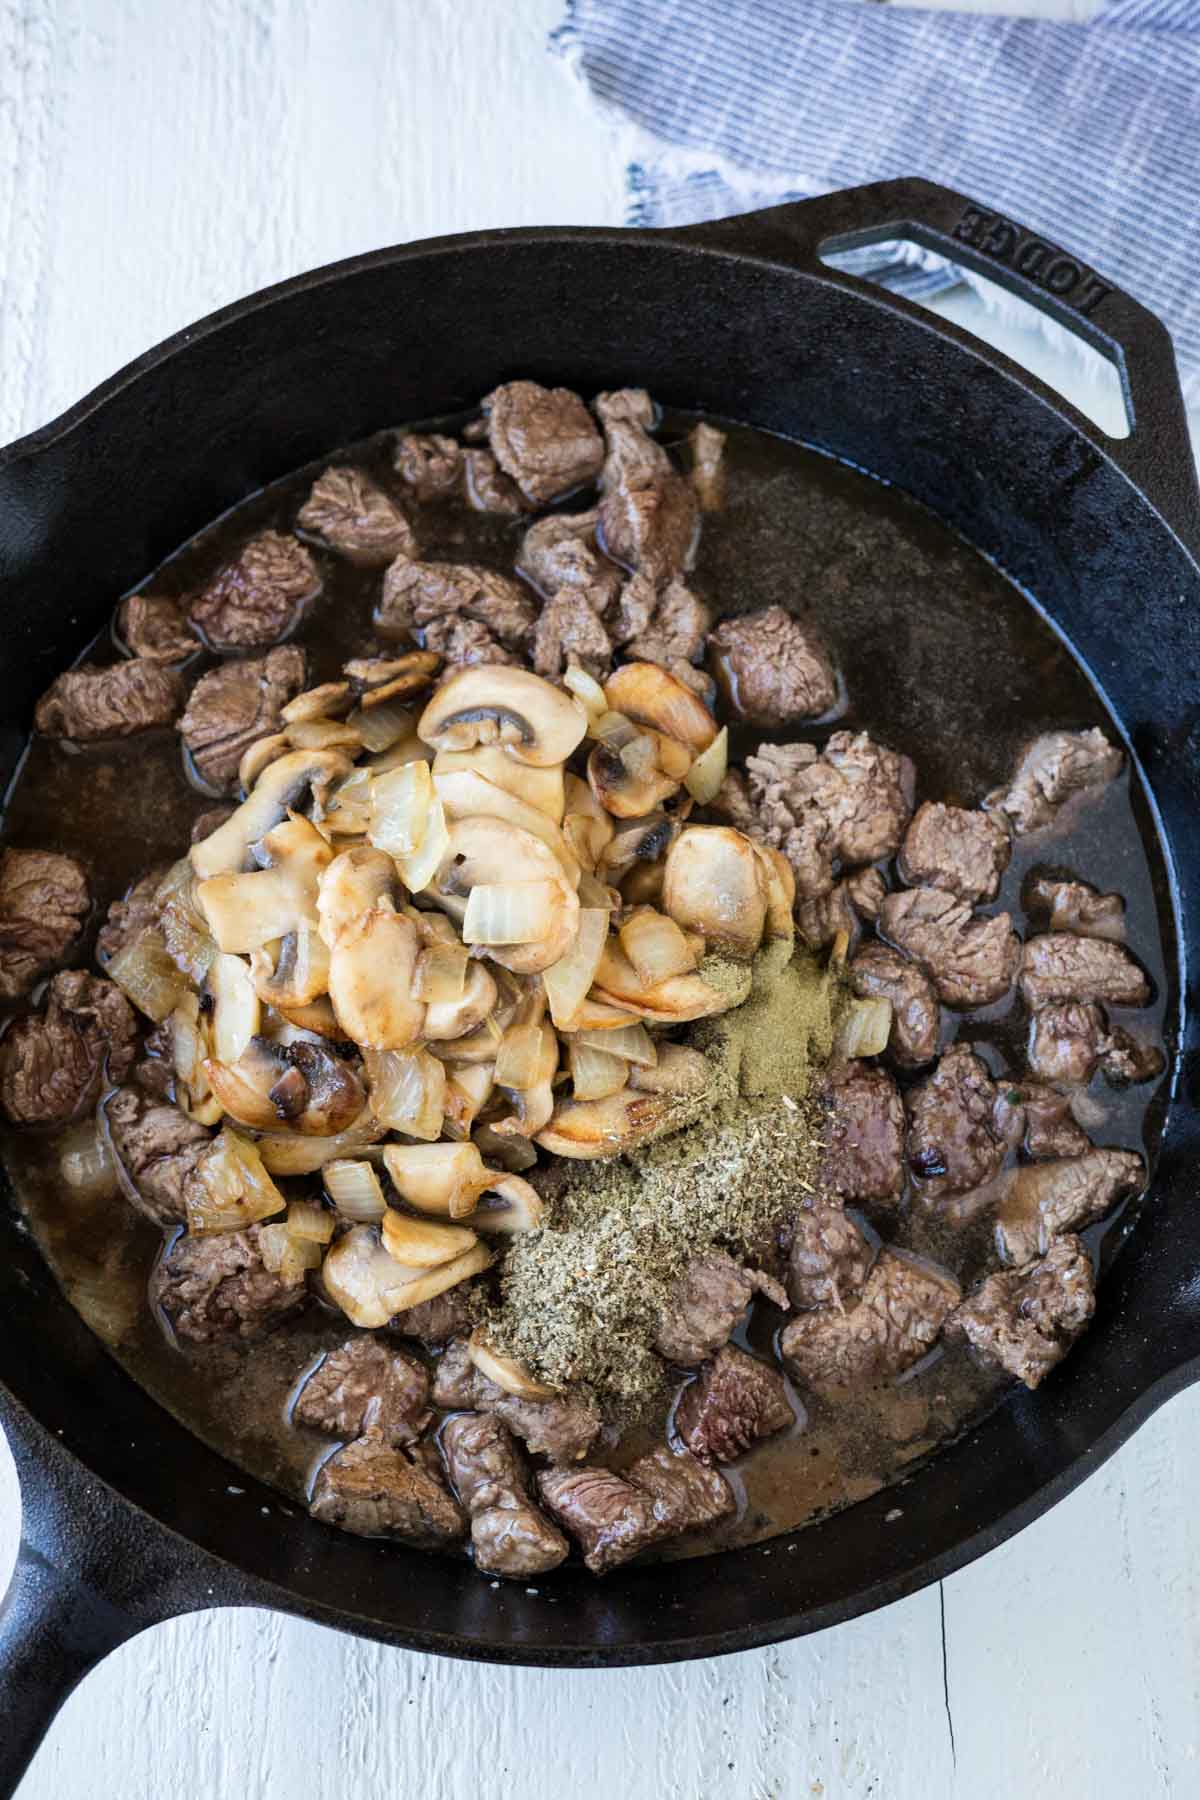 Mushrooms, onions, and steak bites in a cast iron skillet with gravy and herbs.